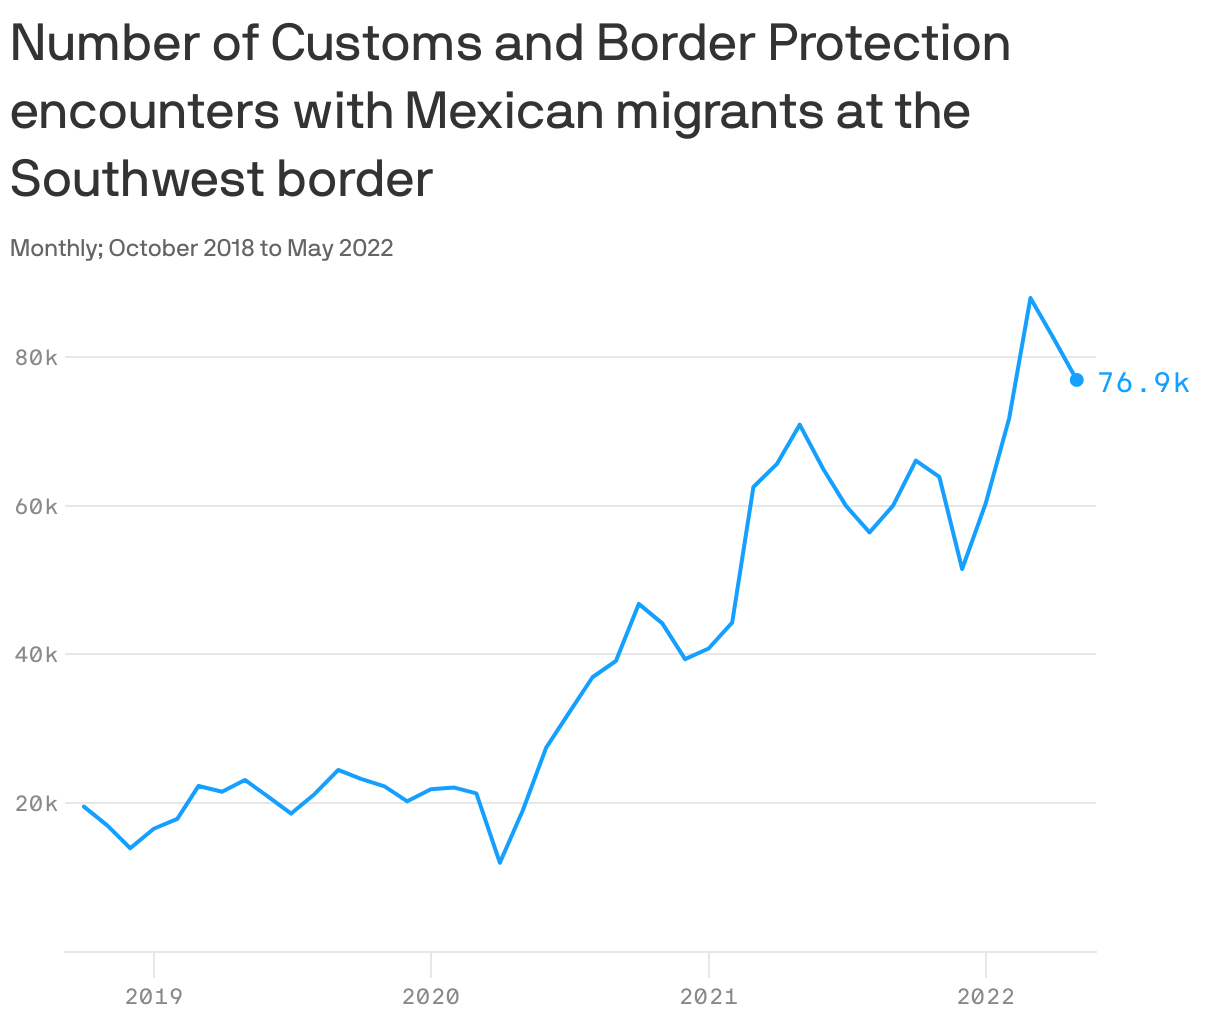 Number of Customs and Border Protection encounters with Mexican migrants at the Southwest border